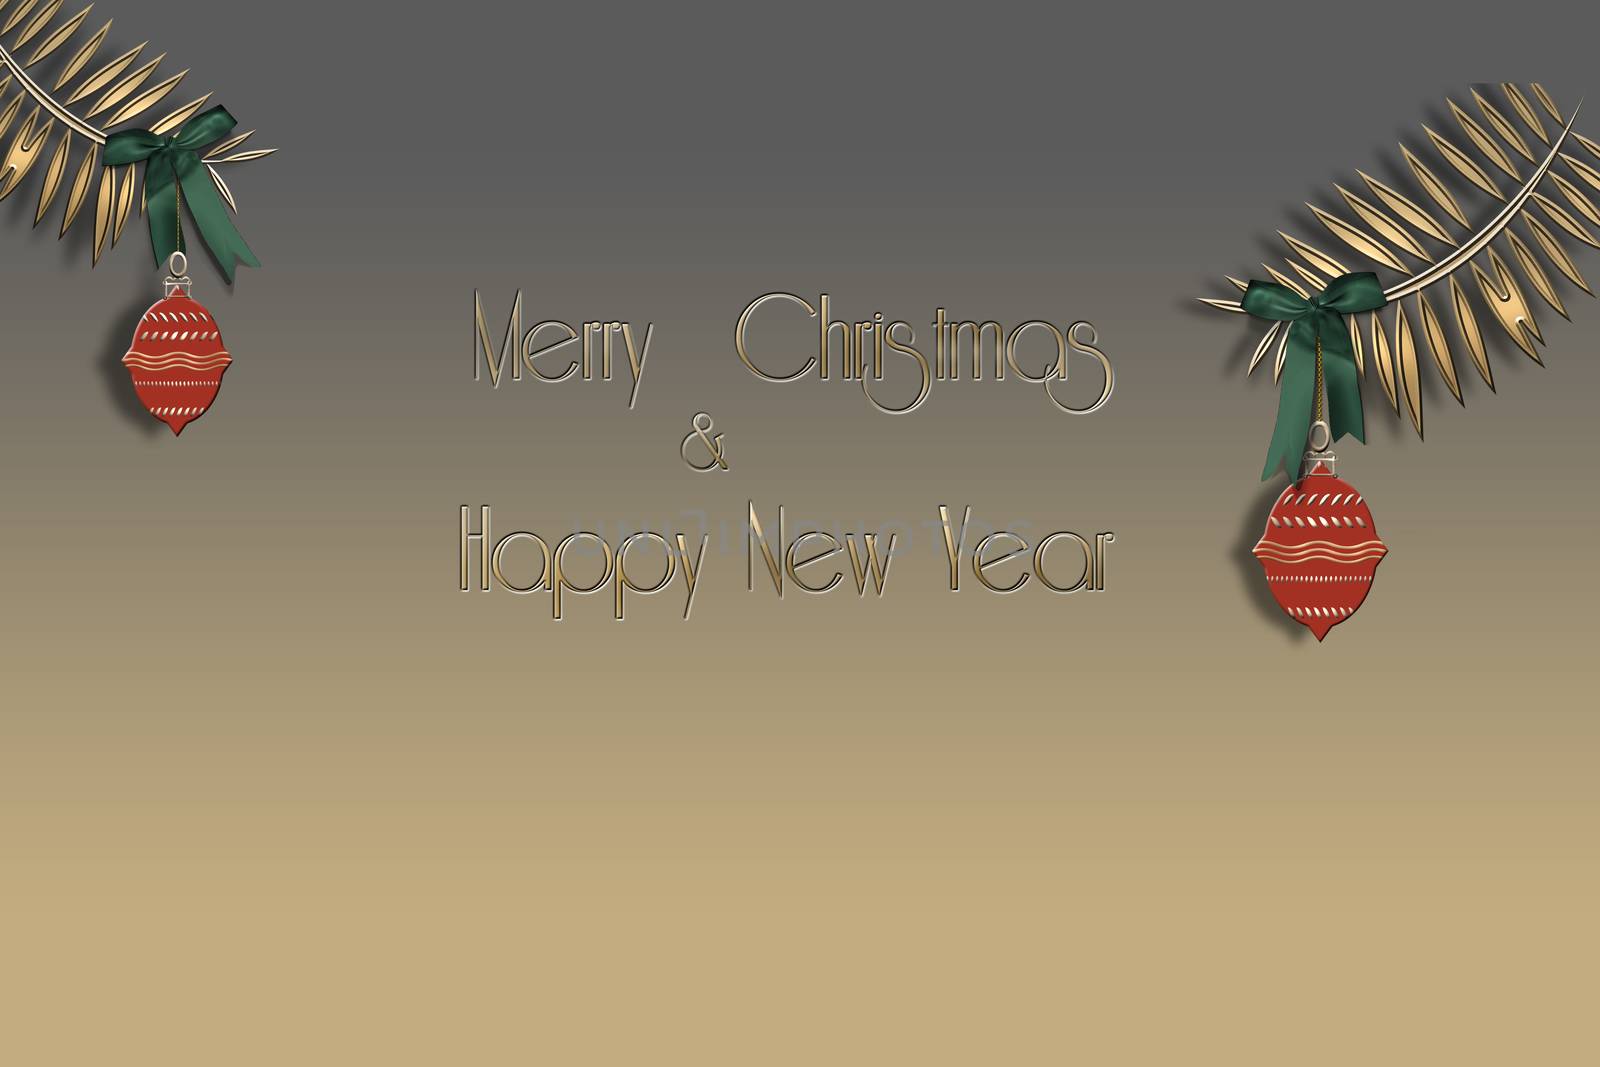 Minimalist Christmas card with gold pine brunches and red balls with green bows on gold background and text Merry Christmas and Happy New Year. 3D illustration